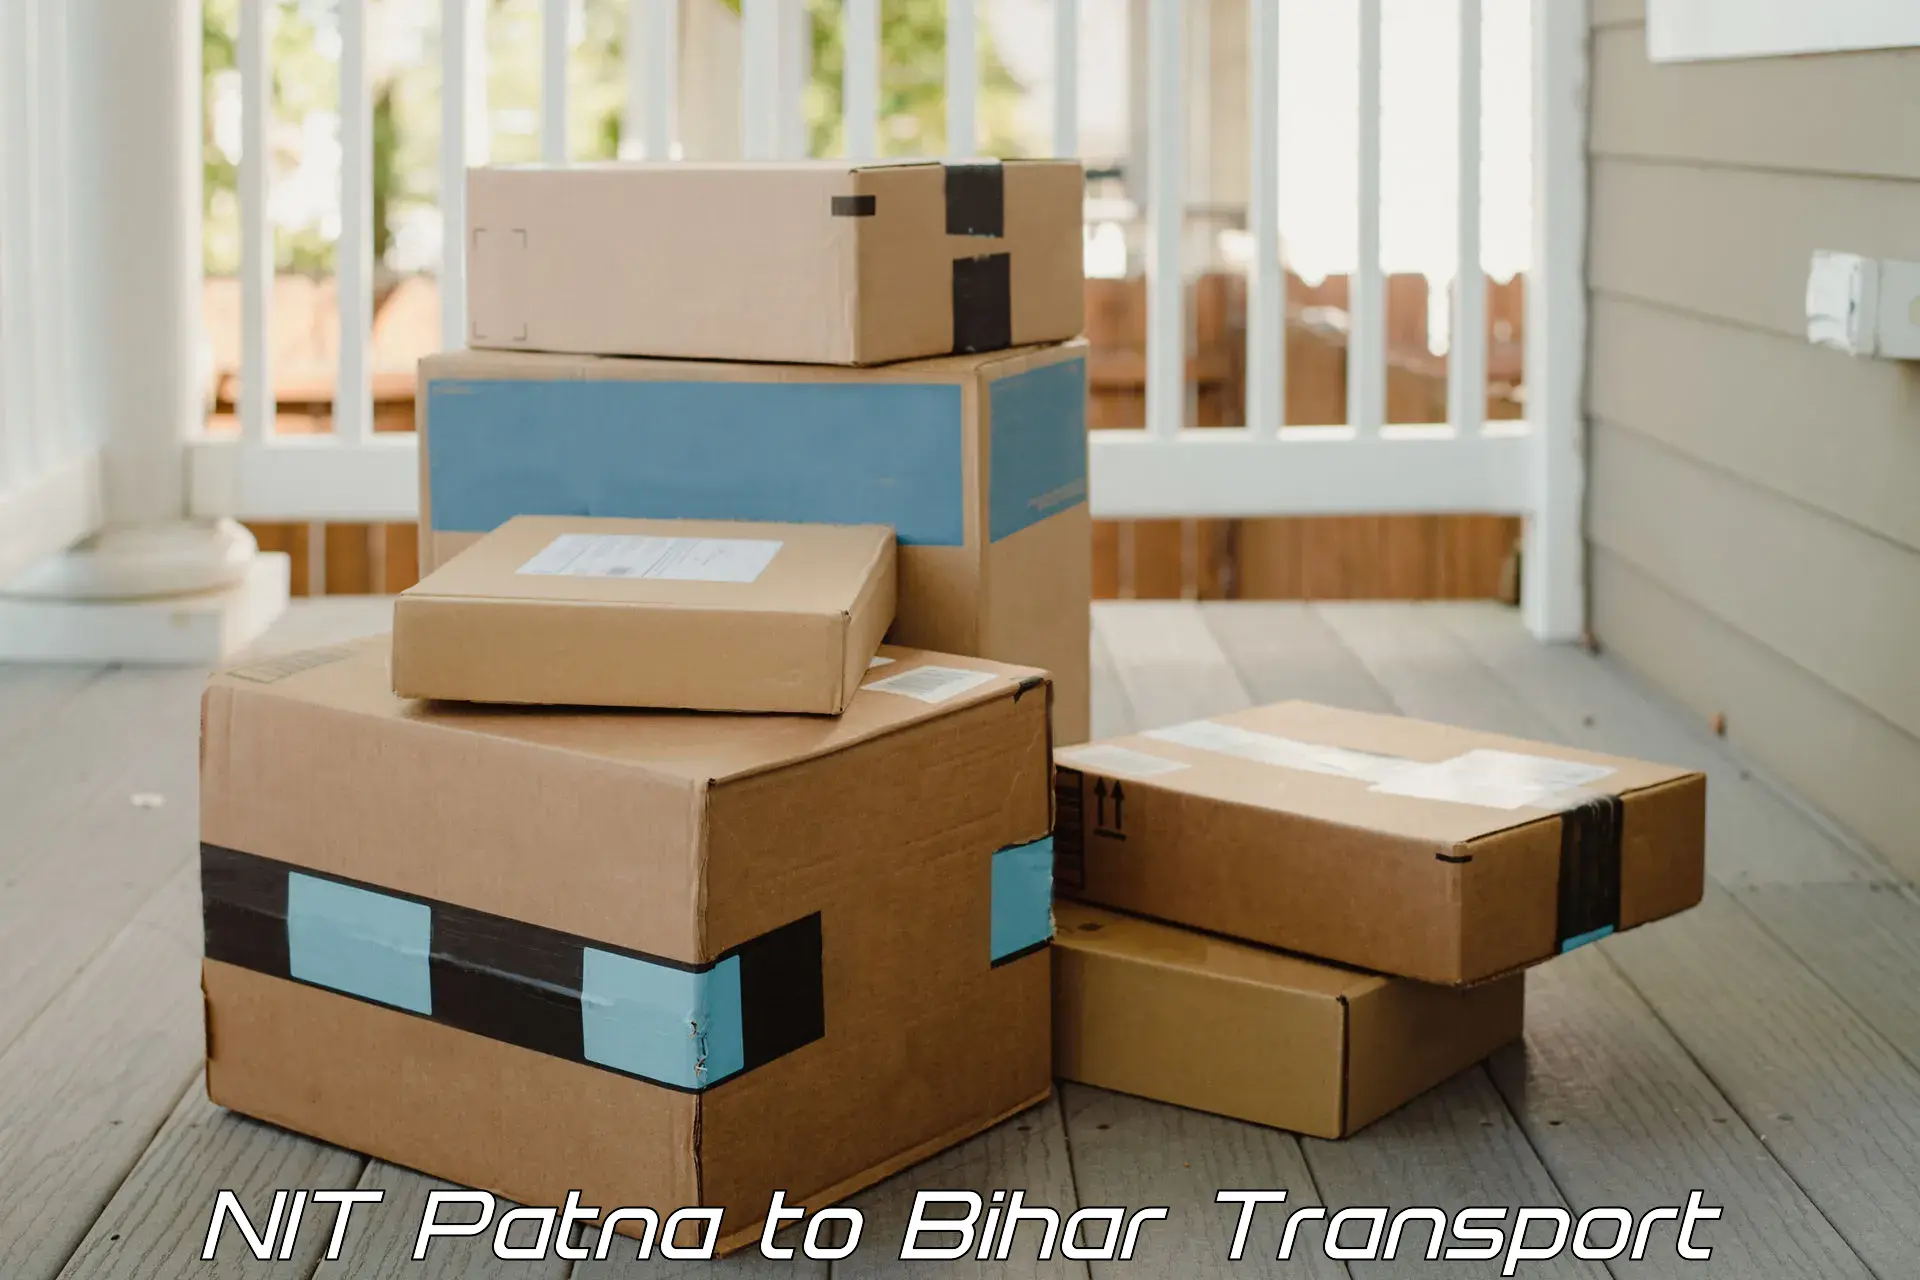 Express transport services in NIT Patna to Raghunathpur Buxar